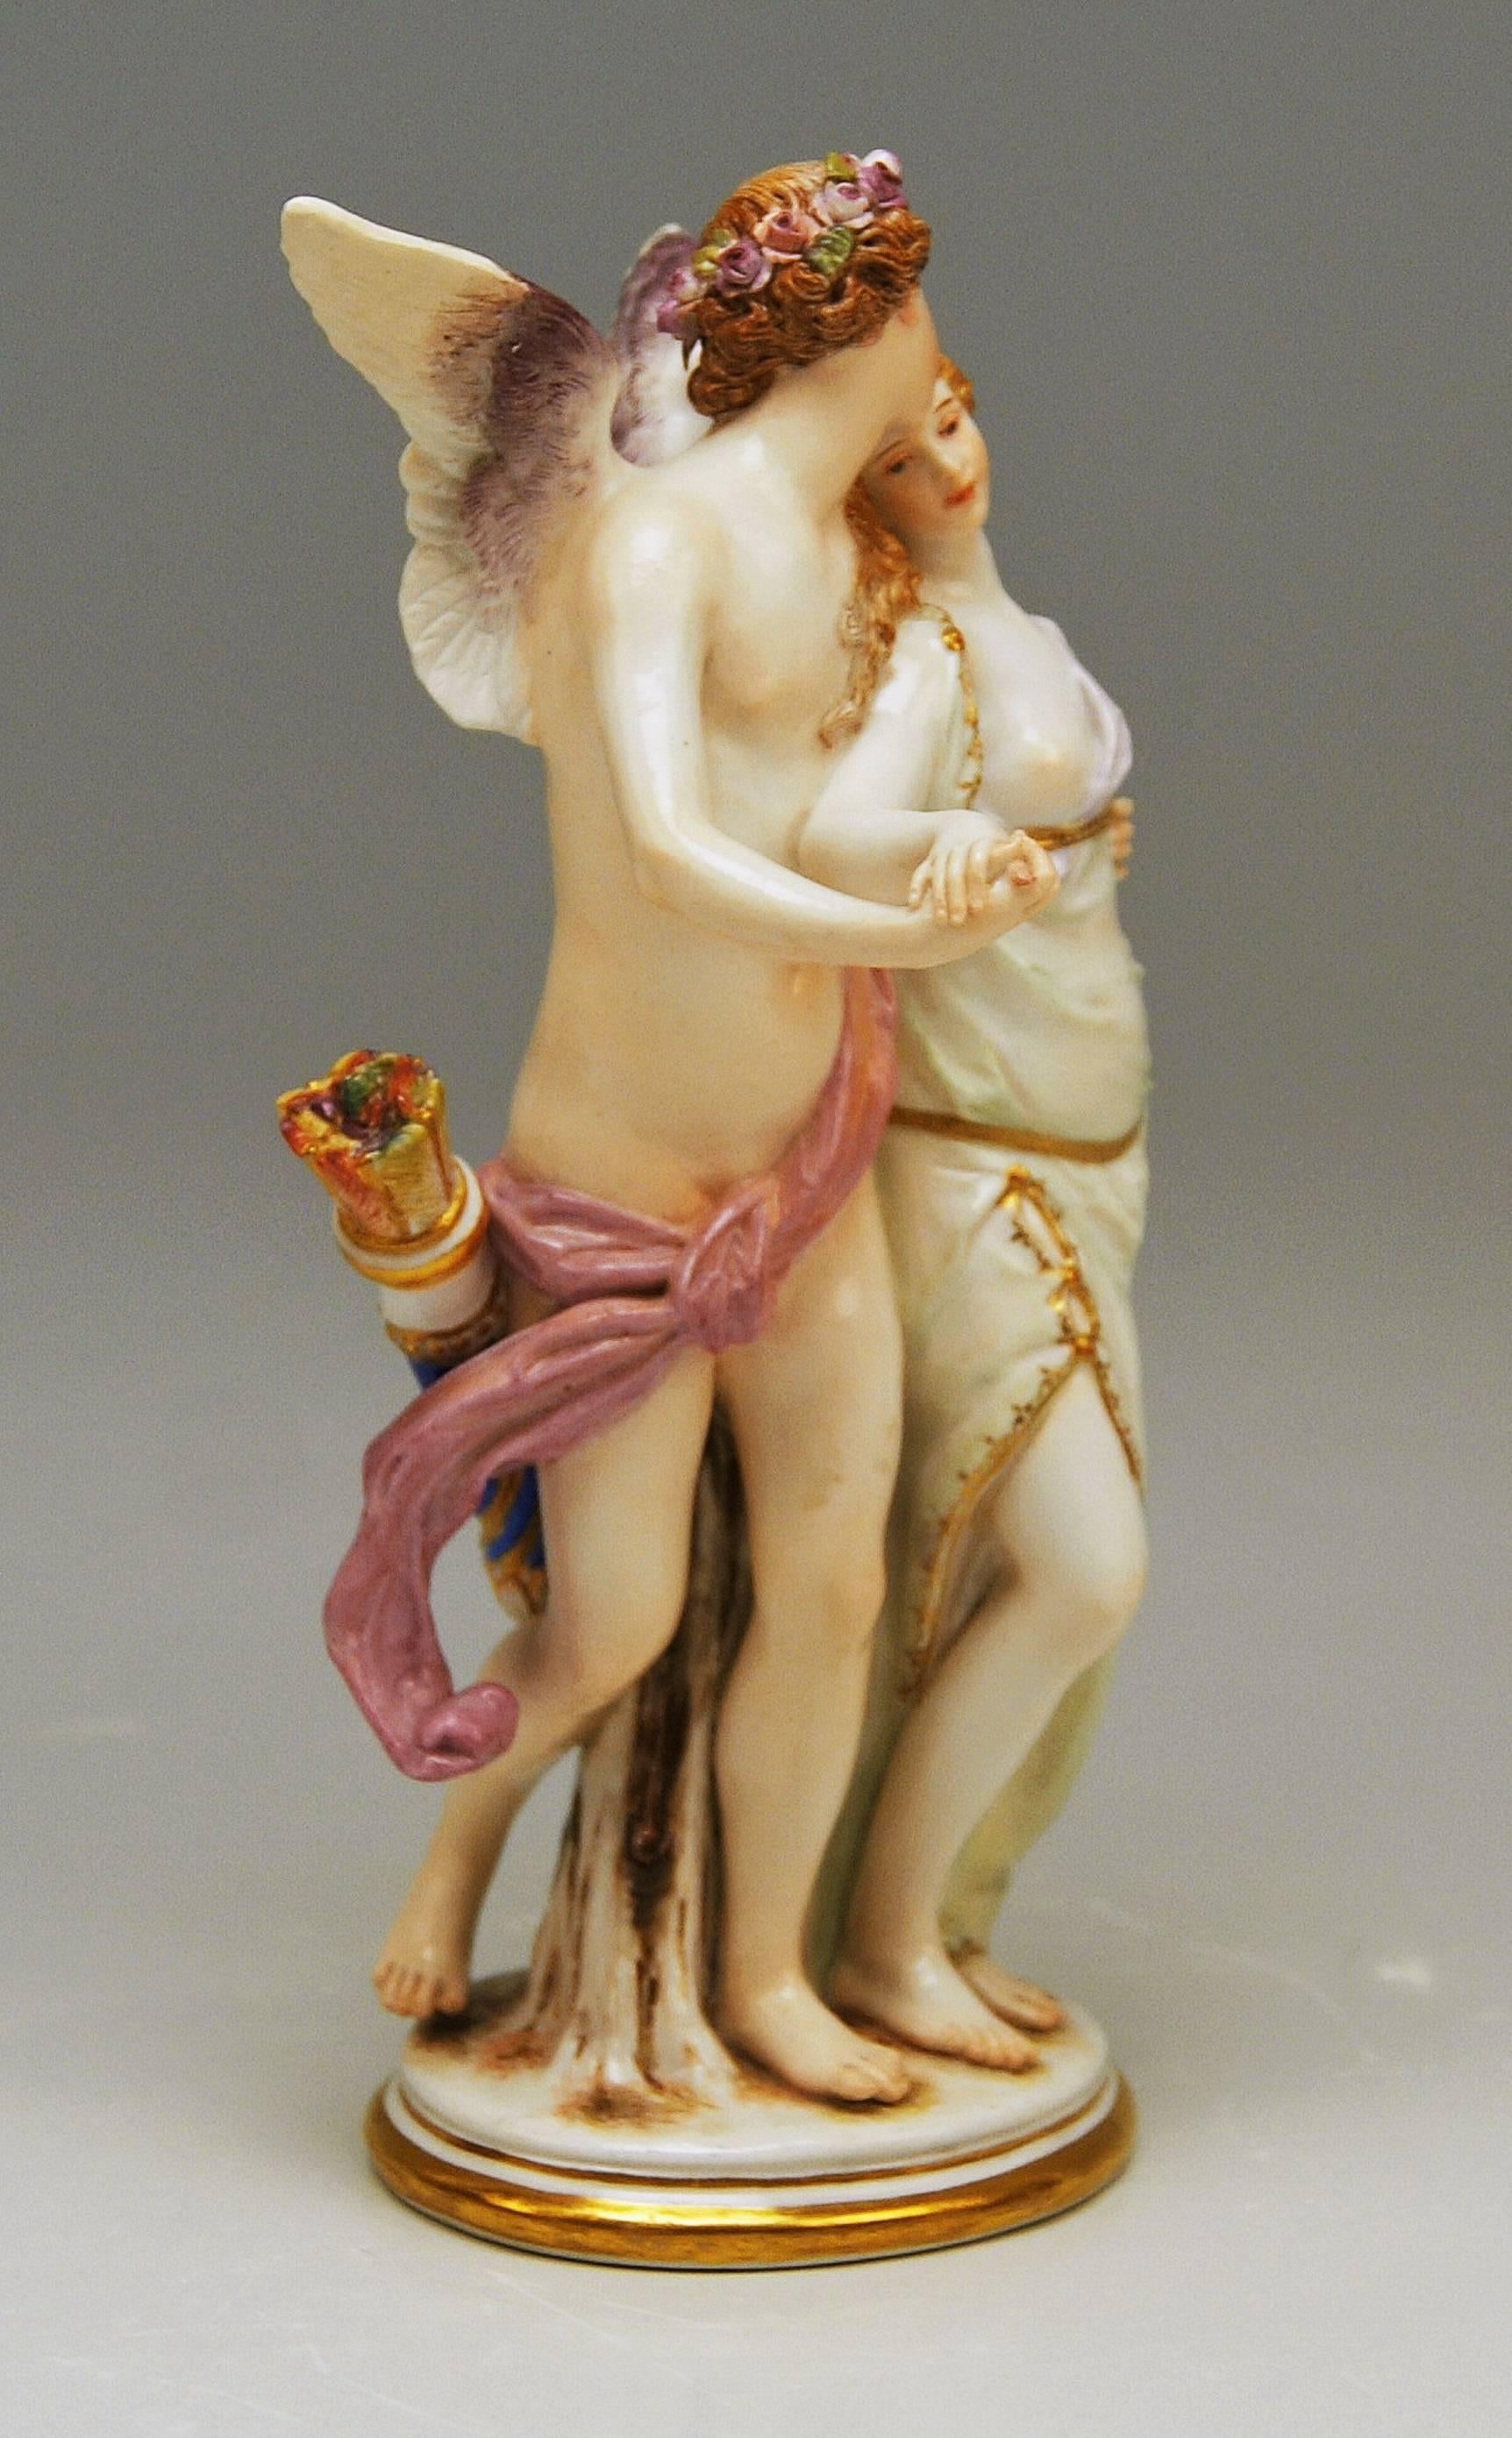 Meissen stunning rarest figurine group: Zephyr and Flora / The Ideal Love
Model P 169

Measures: 
Height: 8.66 inches (= 22.0 cm)
Width: 4.72 inches (= 12.0 cm)
Depth: 5.11 inches (= 13.0 cm)

Manufactory: Meissen
Hallmarked: Blue Meissen